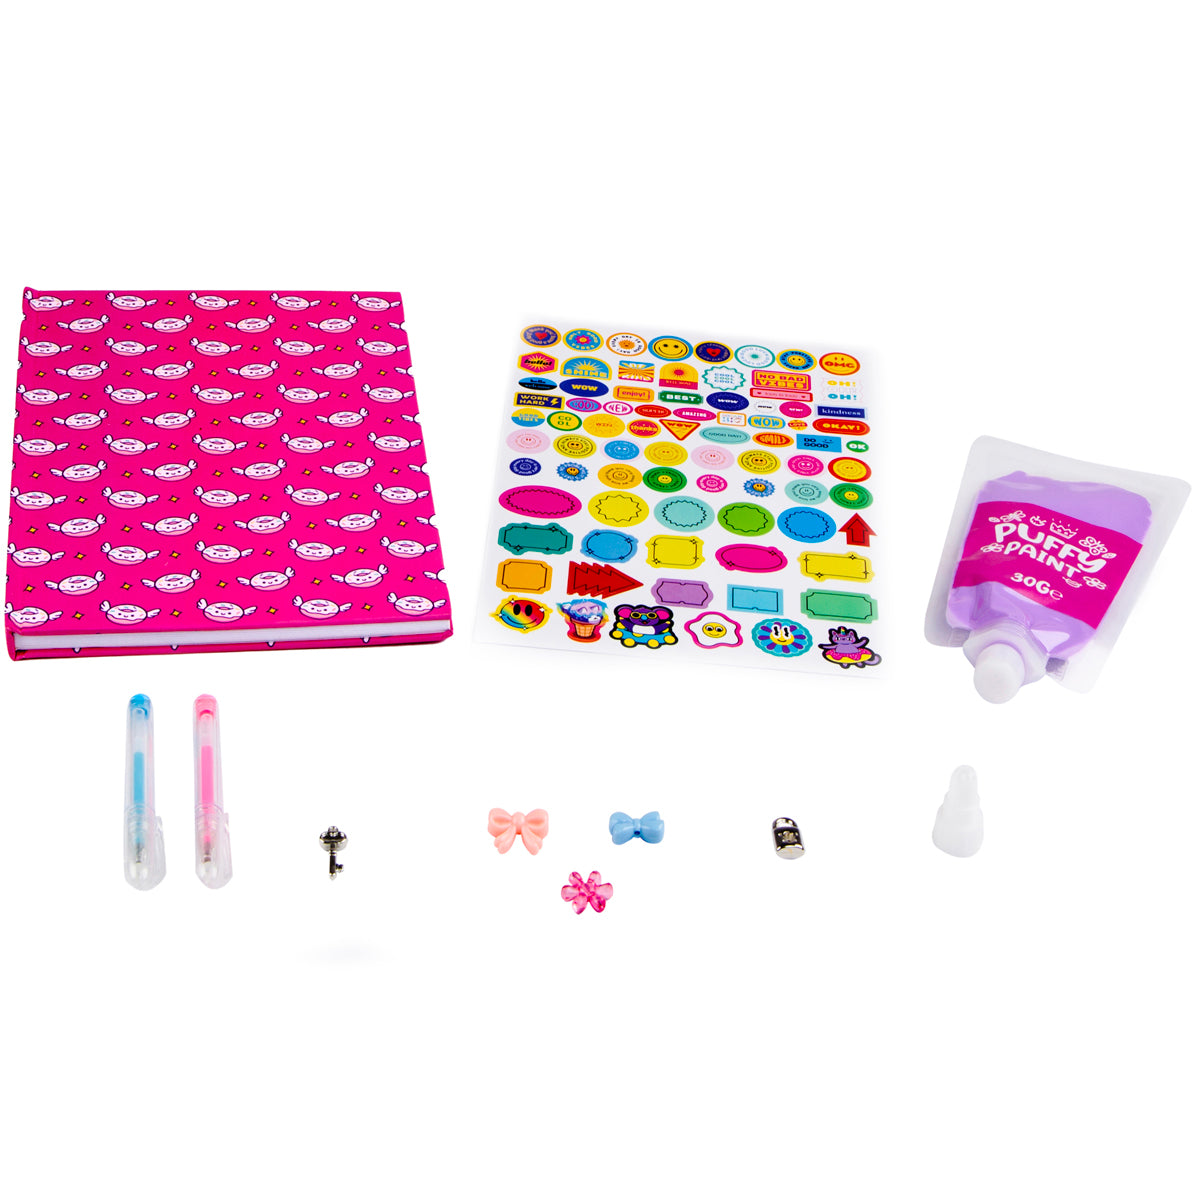 Decorate Your Own Puffy Diary Set